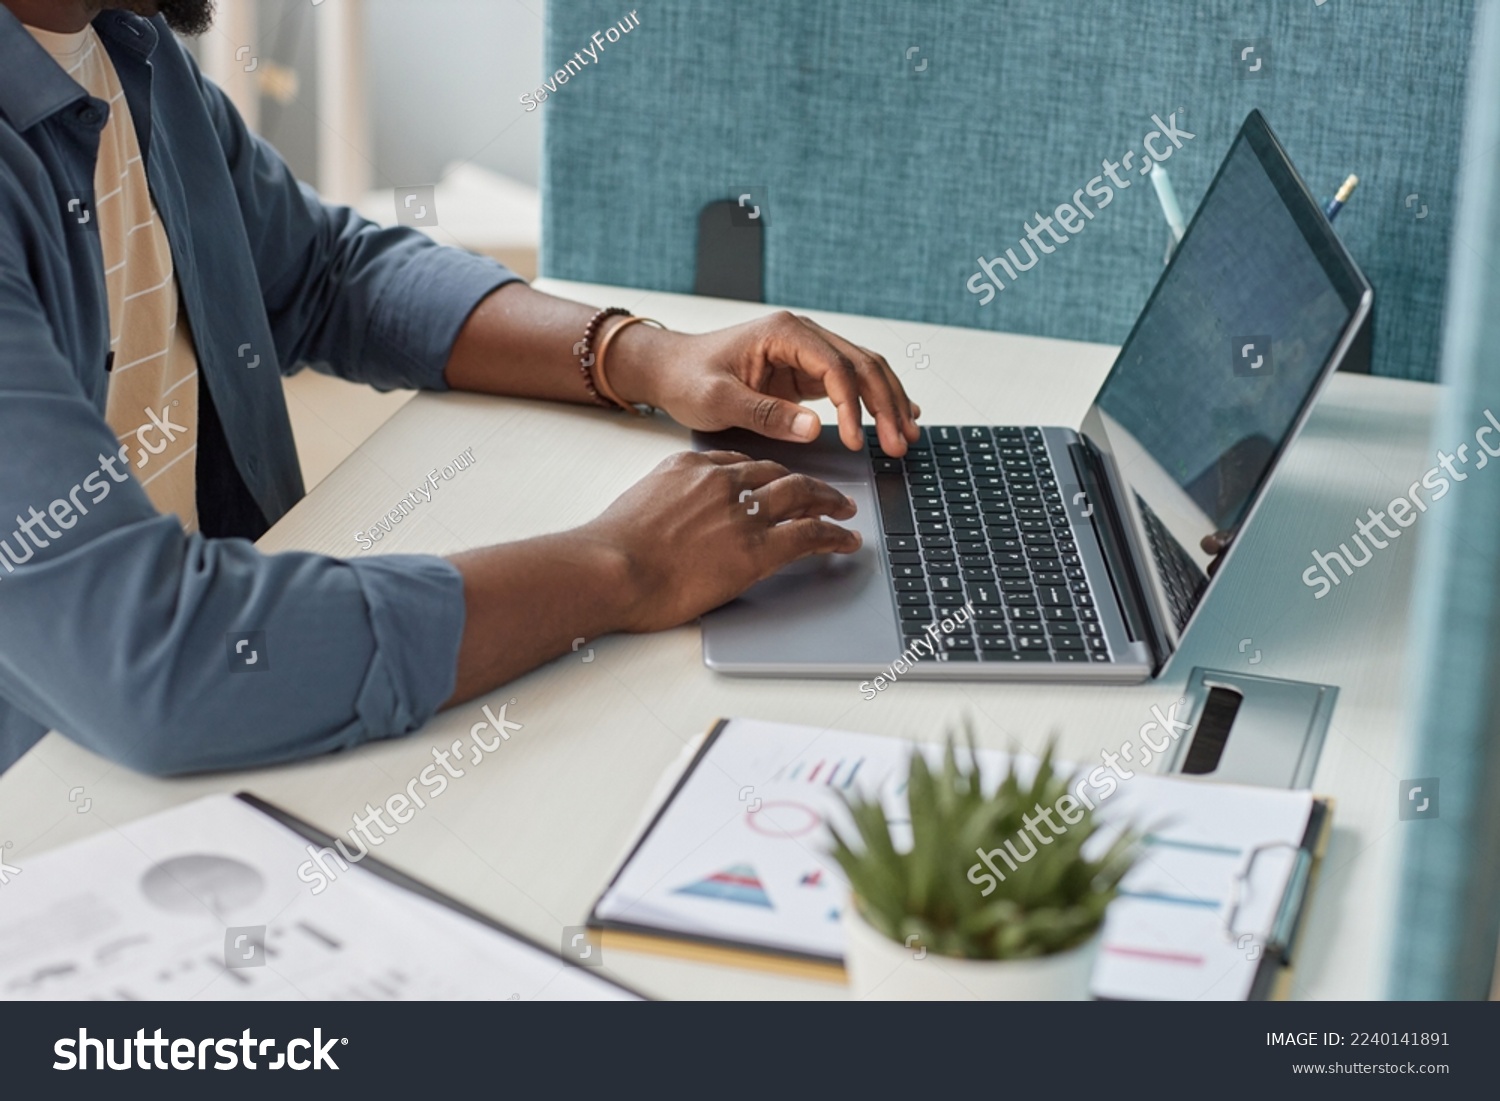 Close up of unrecognizable black man typing at laptop keyboard while using laptop at workplace, copy space #2240141891